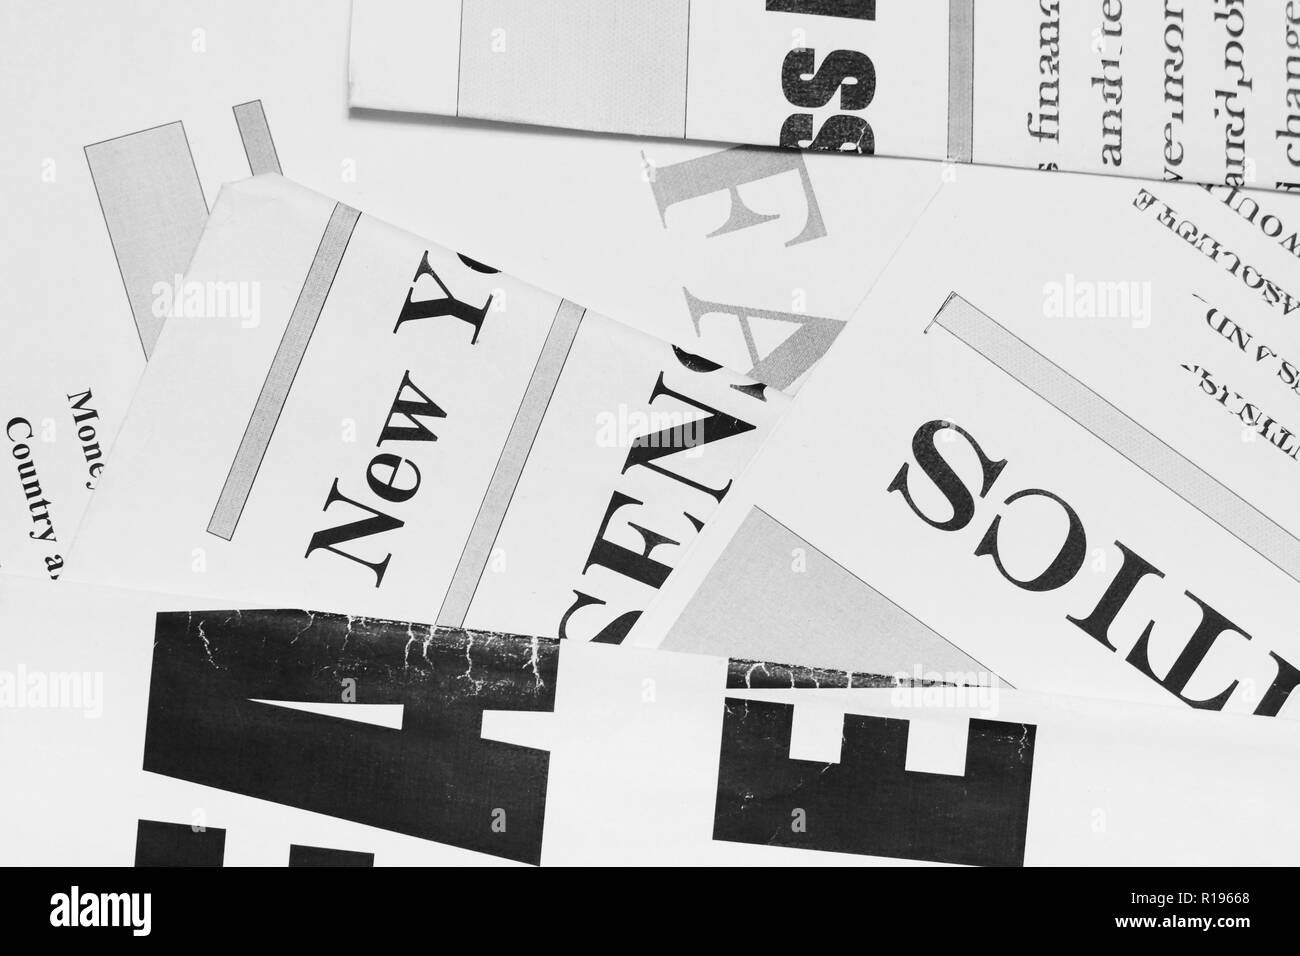 Business news on pages of journals and magazines. Newspapers with headlines and articles scattered on horizontal surface, top view background texture Stock Photo